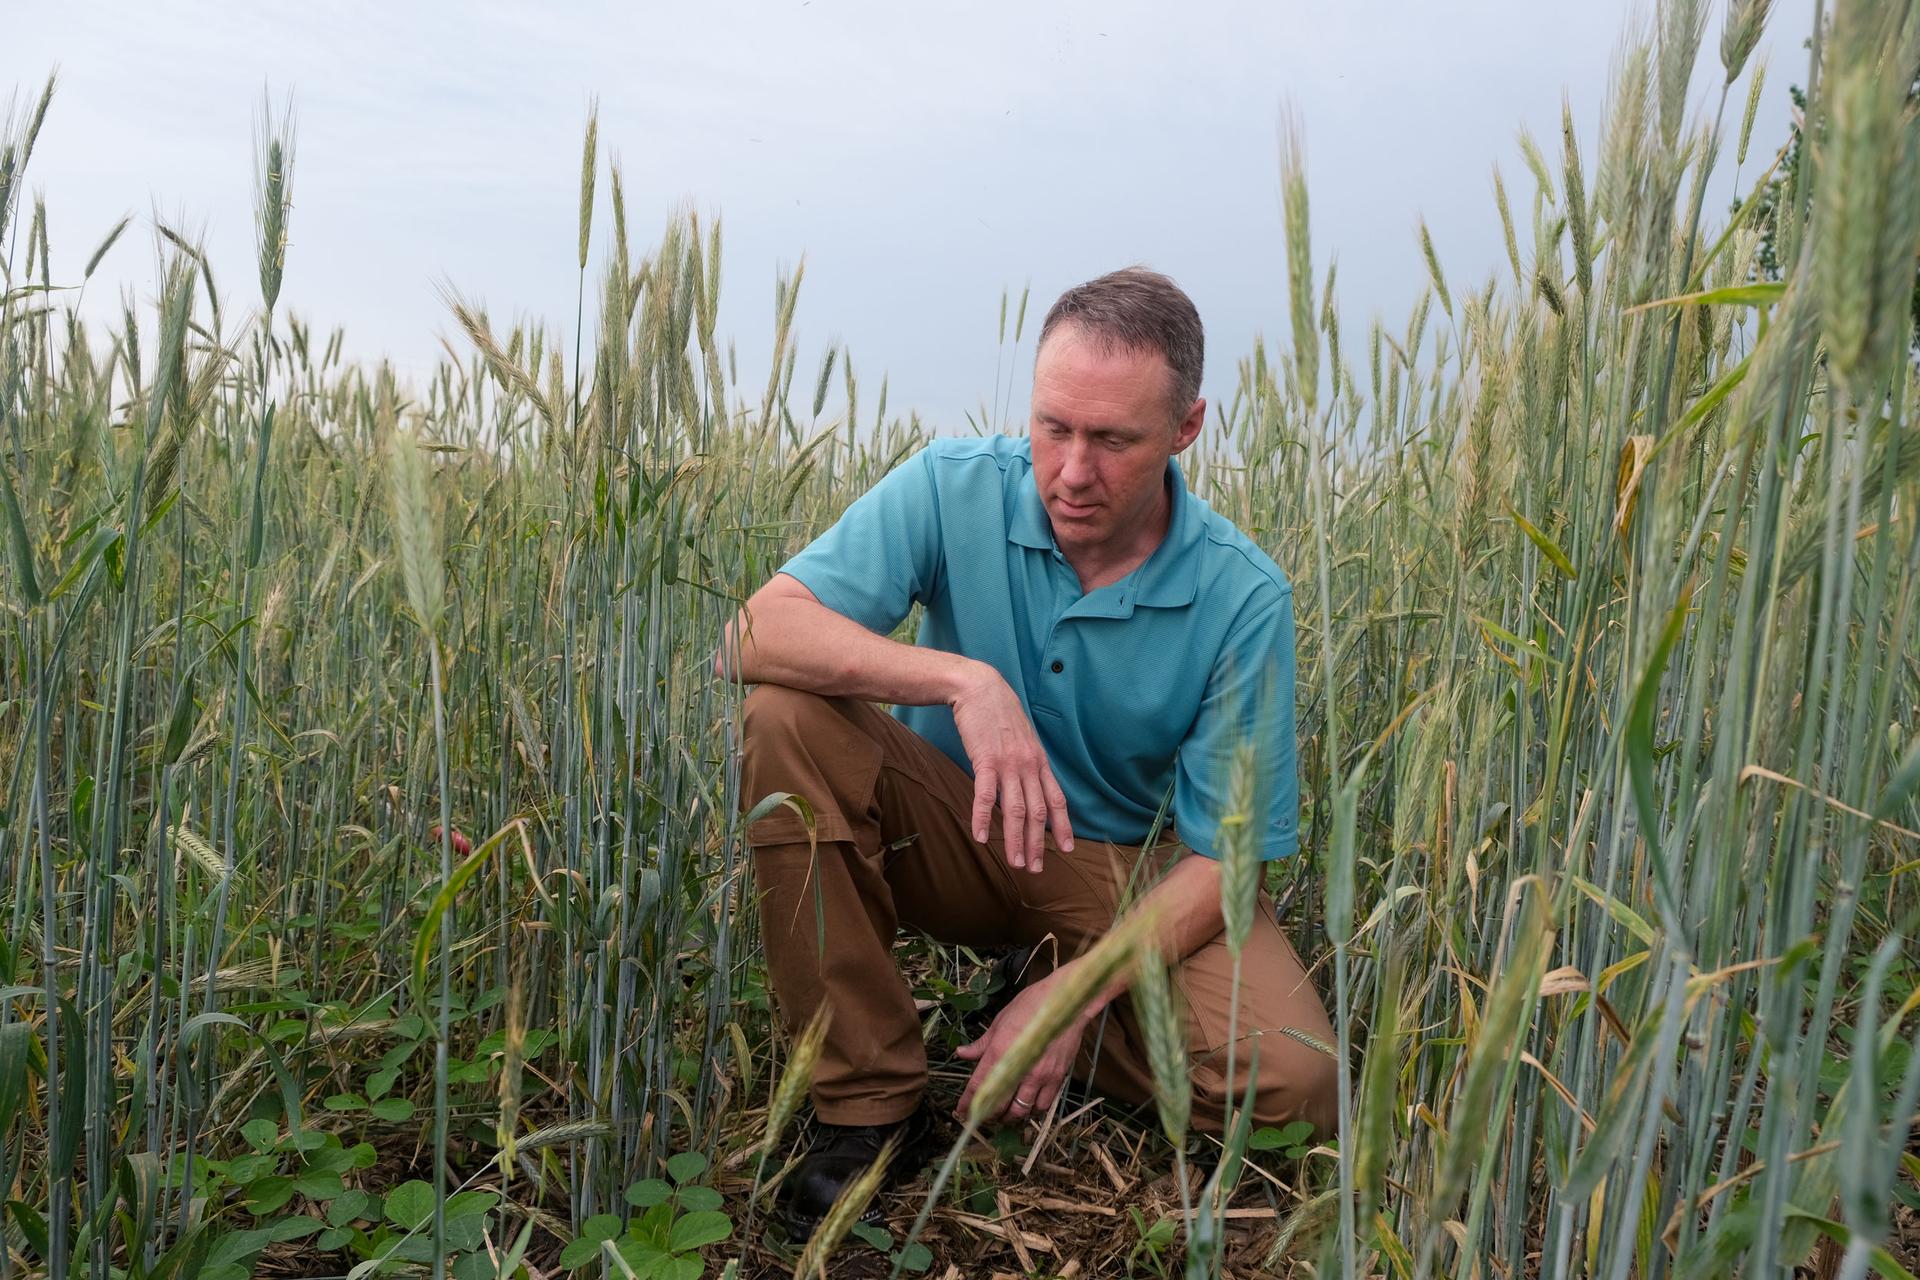 A man is shown kneeling in a wheat field and wearing a blue shirt.